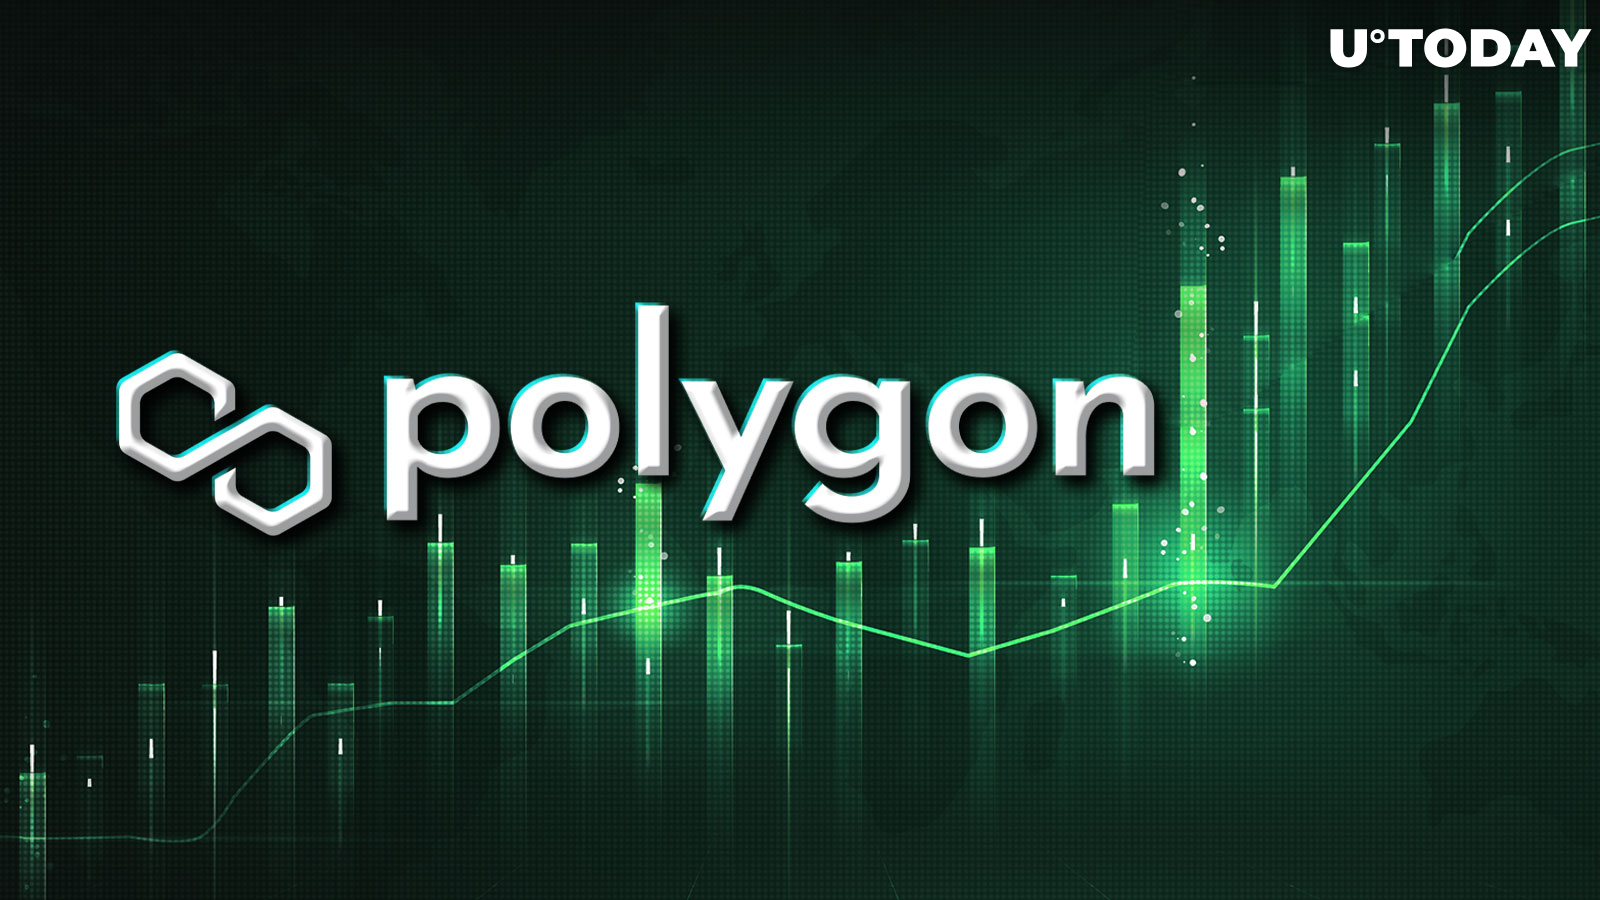 Polygon (MATIC) Price Goes Green as Whales Buy Dip: Details